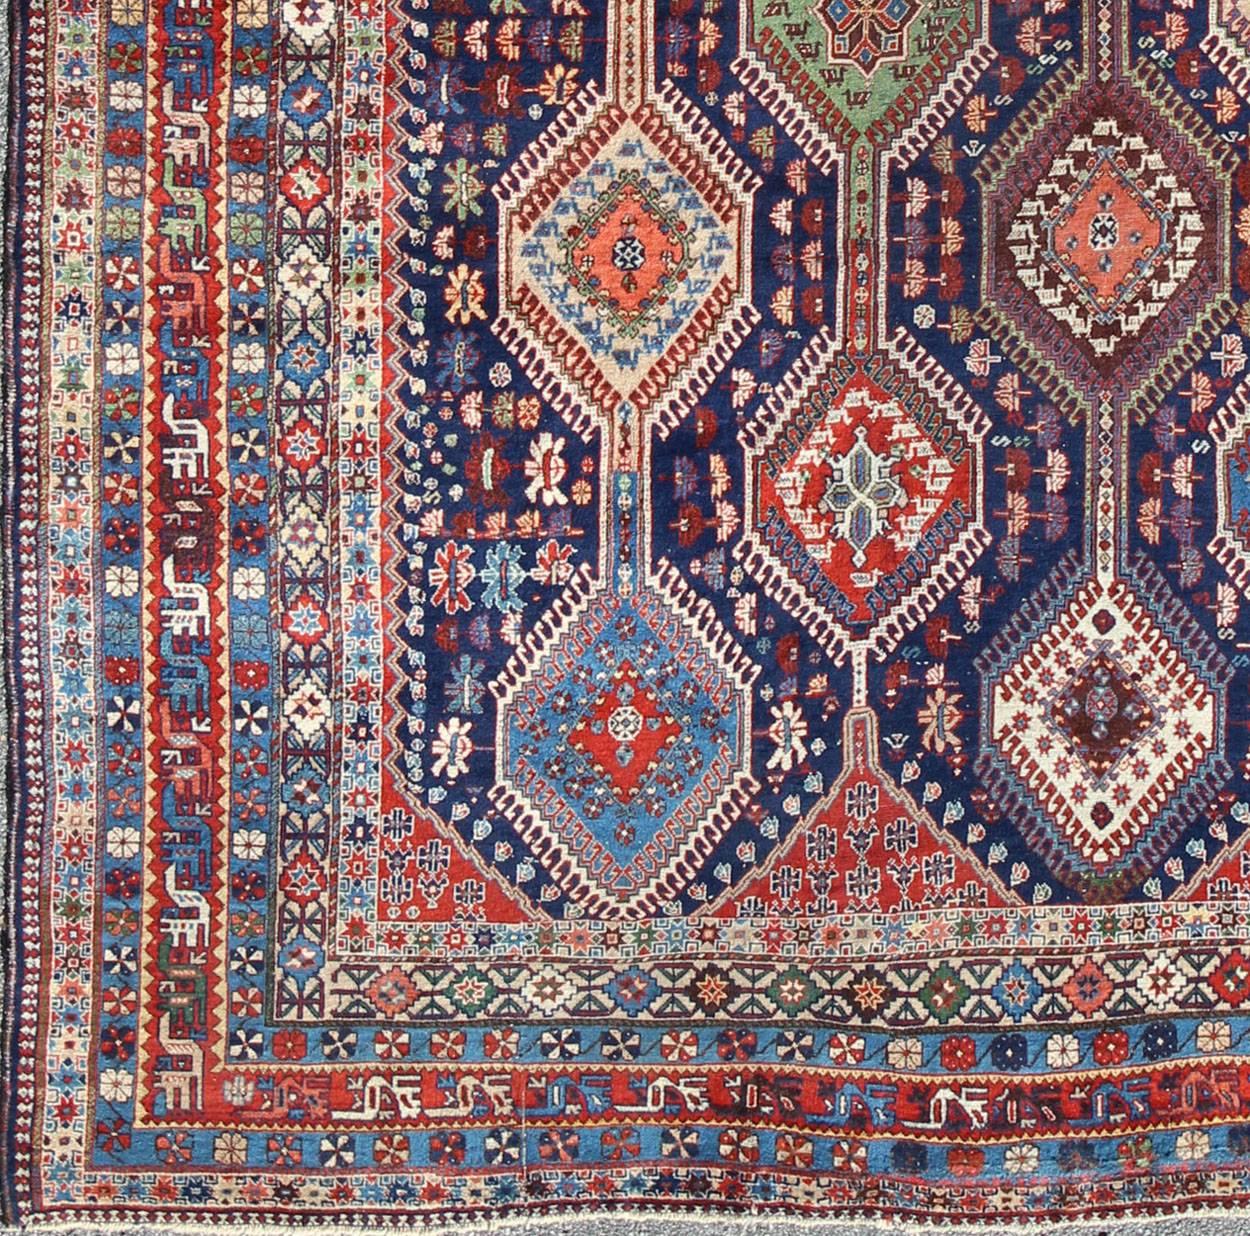 Antique Persian Large Qashqai Rug with Rich Jewel Tones and Diamond Design, kwarugs, Keivan Woven Arts Rug#16-0906, Anusually large in size for an Qashqai, Bold geometry, rich symbolism, and vivid coloration enhance the beauty of this stunning